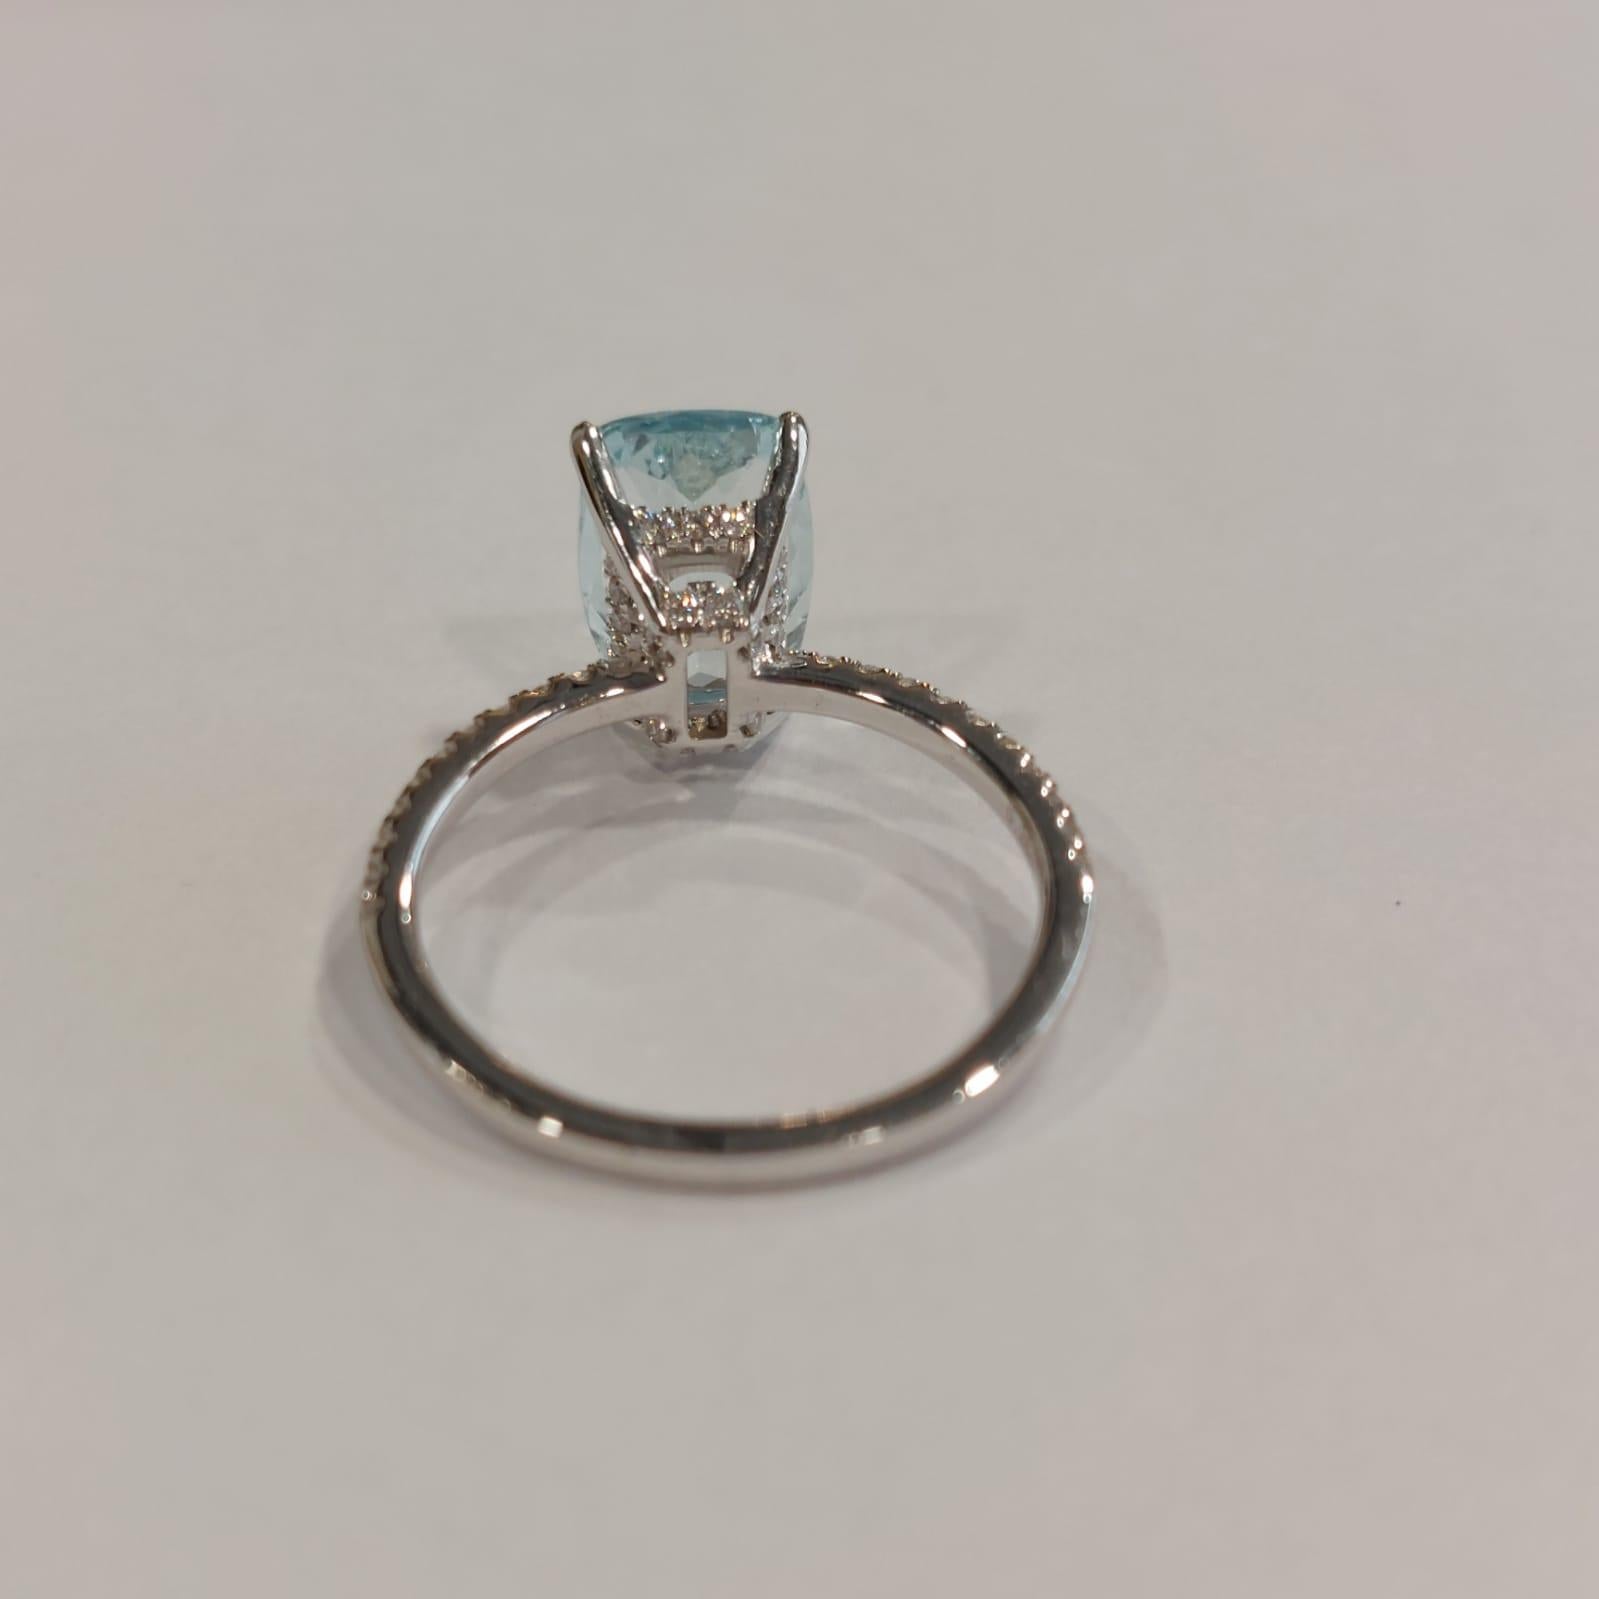 Gilin 18k White Gold Diamond Ring with Aquamarine For Sale 3